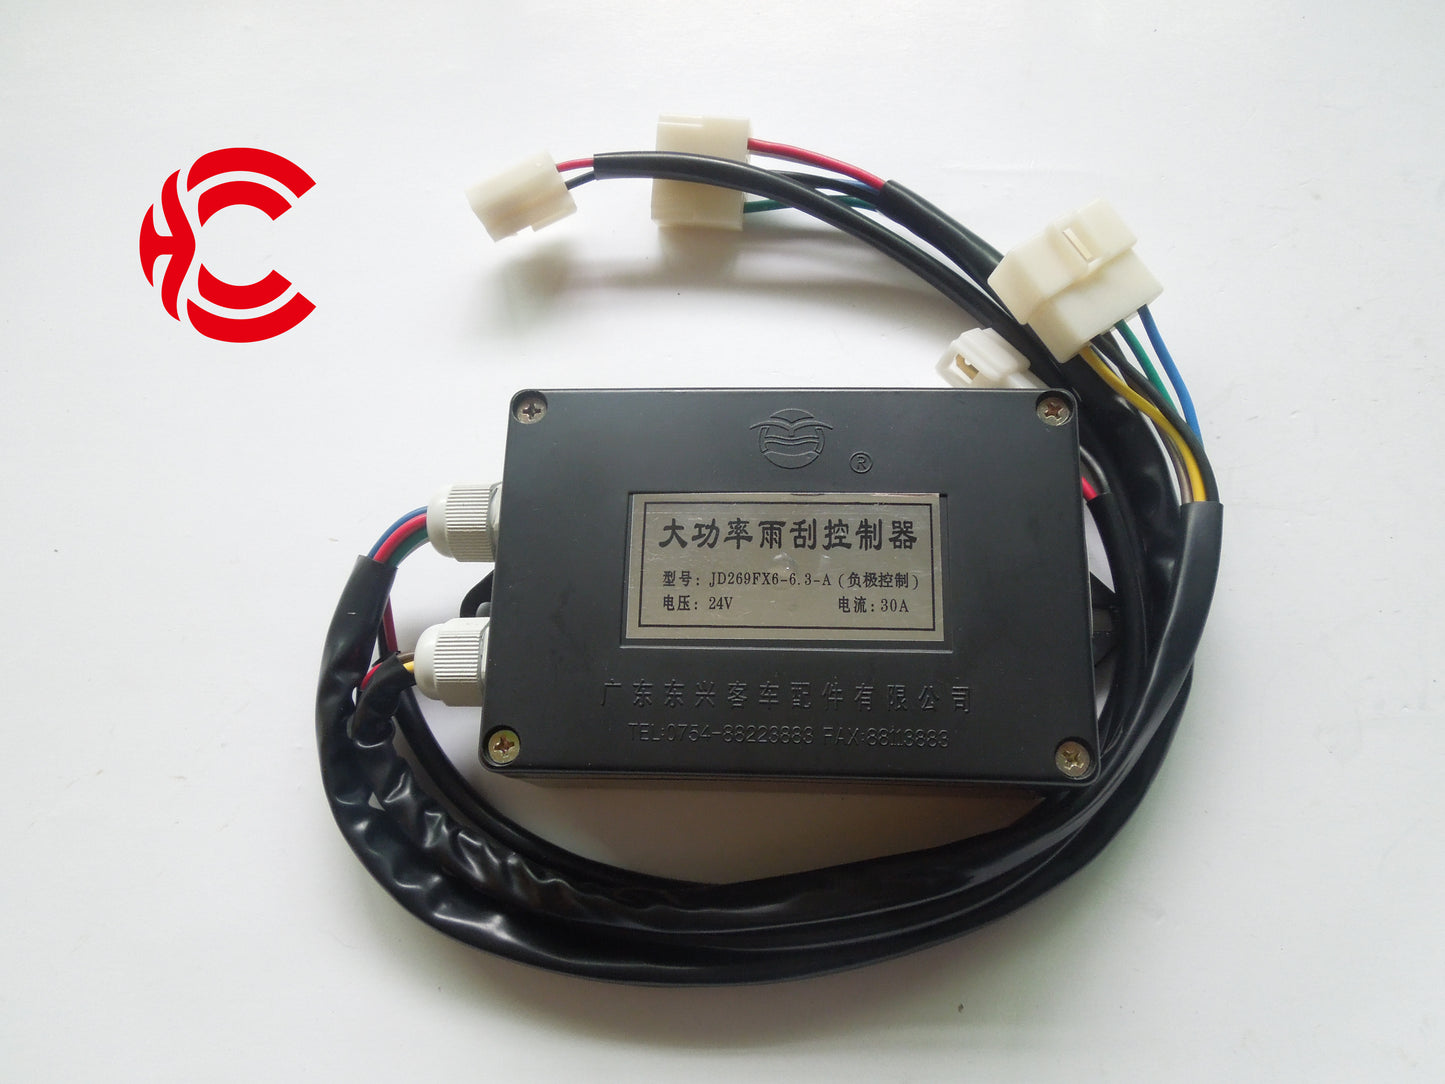 OEM: JD269FX6-6.3-A Negative ControlMaterial: ABS Color: black Origin: Made in ChinaWeight: 150gPacking List: 1* Wiper Intermittent Relay More ServiceWe can provide OEM Manufacturing serviceWe can Be your one-step solution for Auto PartsWe can provide technical scheme for you Feel Free to Contact Us, We will get back to you as soon as possible.